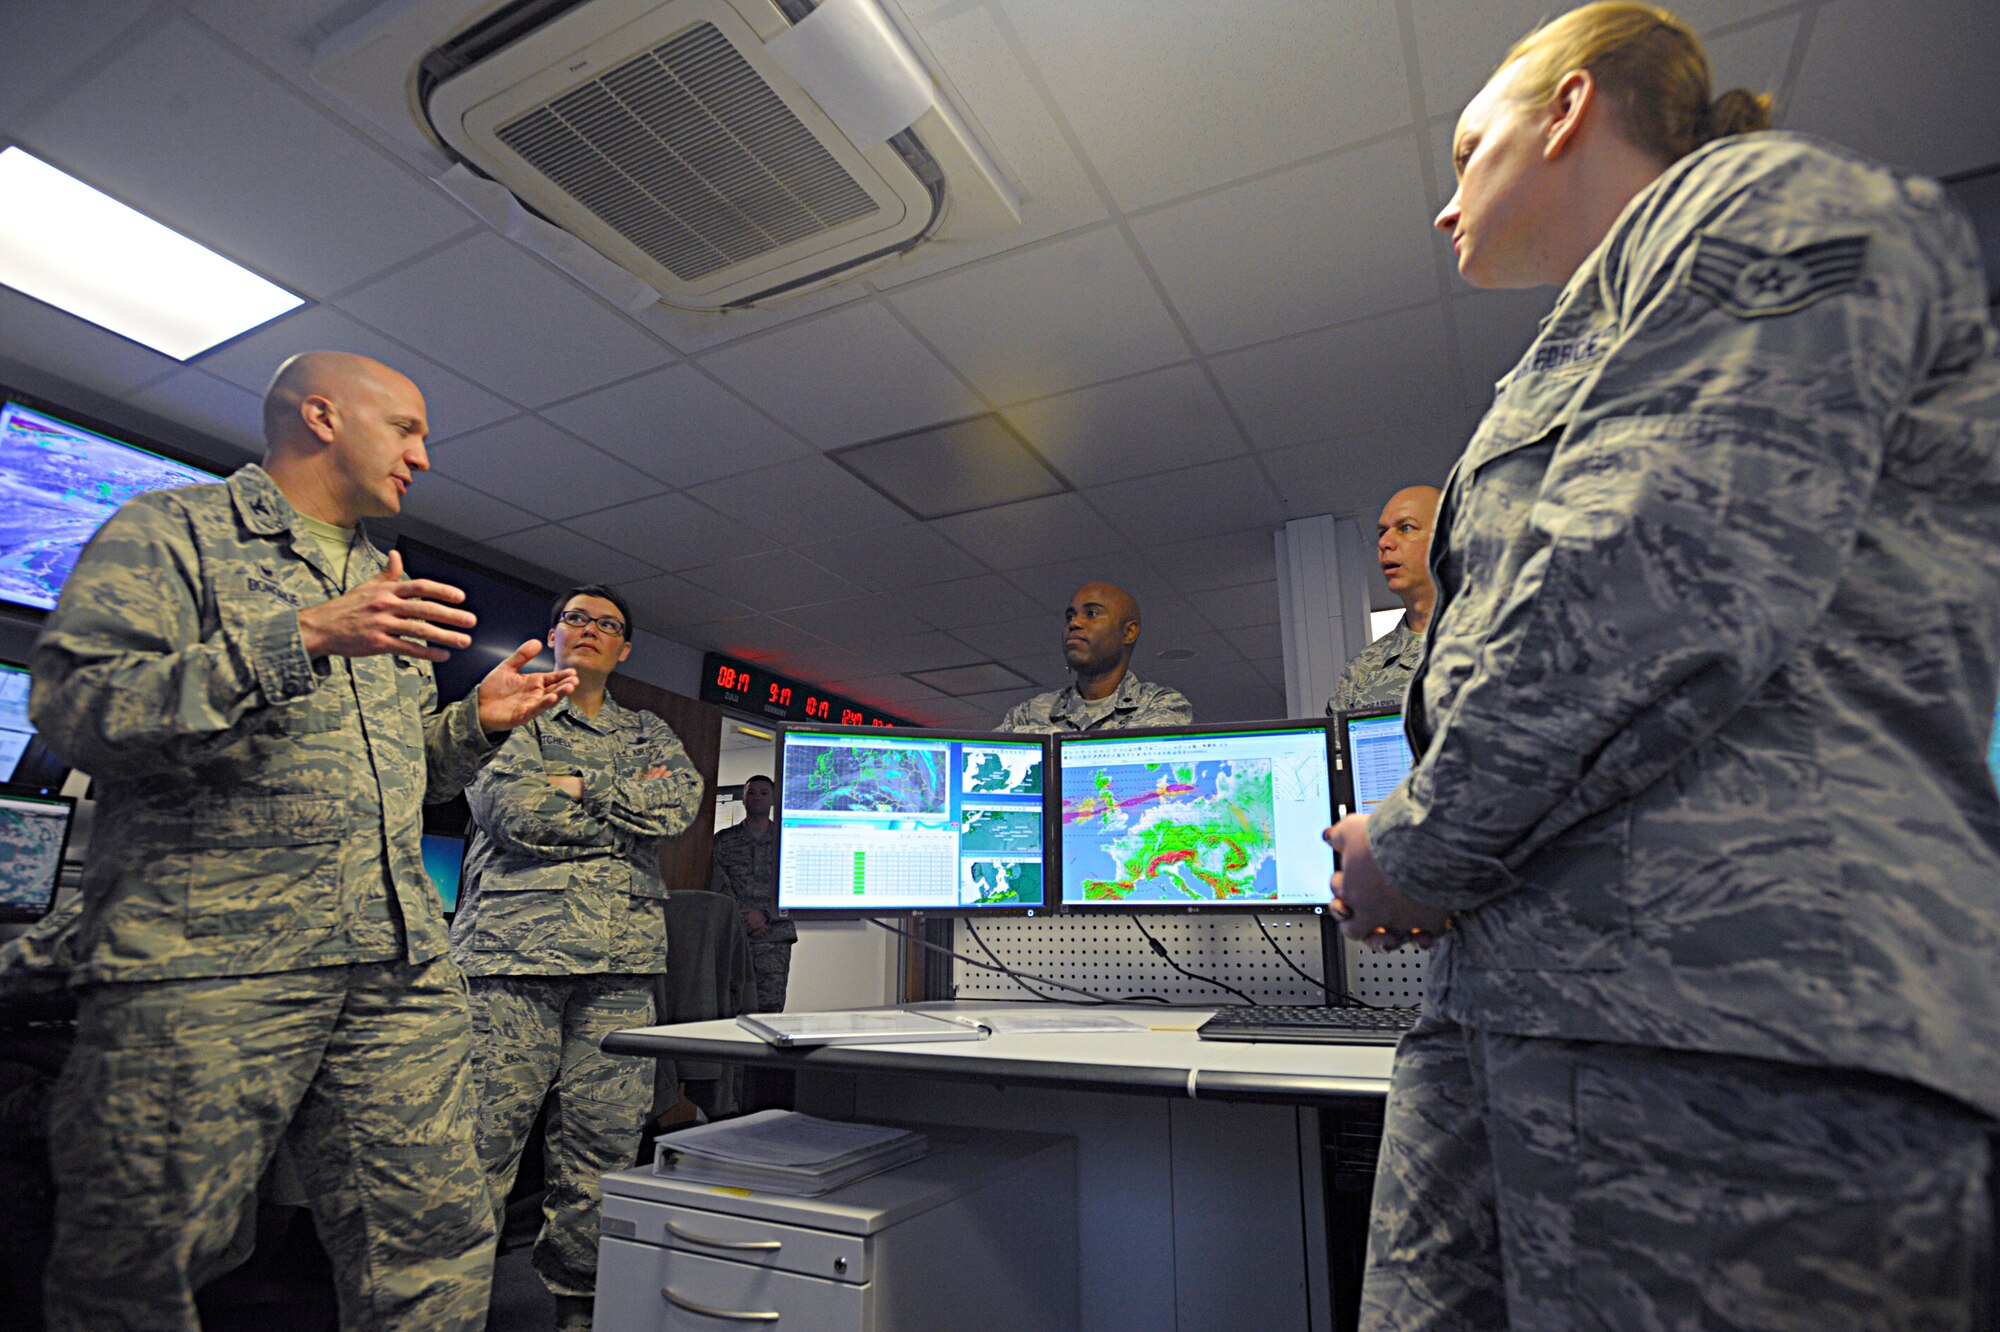 Col. Gerald Donohue, 86th Operations Group commander, speaks to Airmen of the 21st Operational Weather Squadron during a tour of the squadron Feb. 22, 2016, at Kapaun Air Station, Germany. Donohue and Chief Master Sgt. Amber Mitchell, 86th OG superintendent, toured the 21st OWS to learn about the capabilities they provide not only to Ramstein Air Base but to all Department of Defense operations within the U.S. European Command and U.S. Africa Command’s areas of responsibility. (U.S. Air Force photo/Staff Sgt. Timothy Moore)